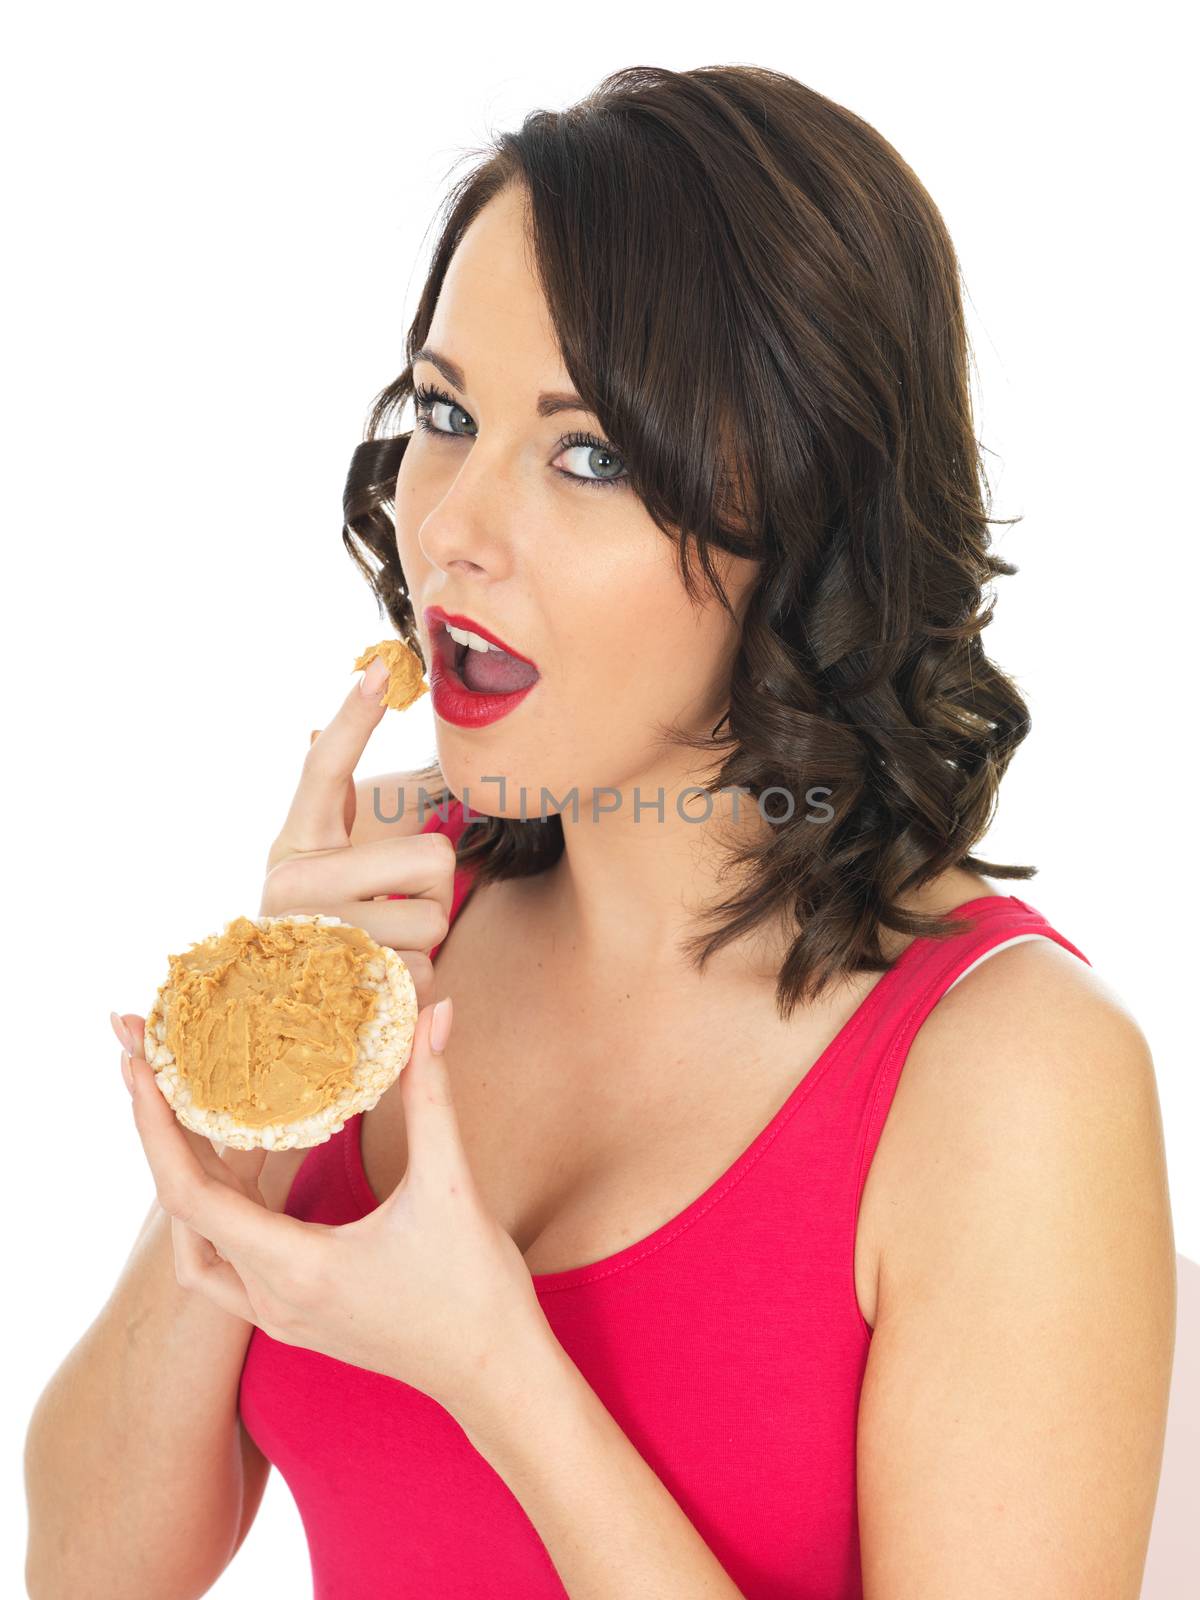 Young Woman Eating Peanut Butter on a Cracker by Whiteboxmedia